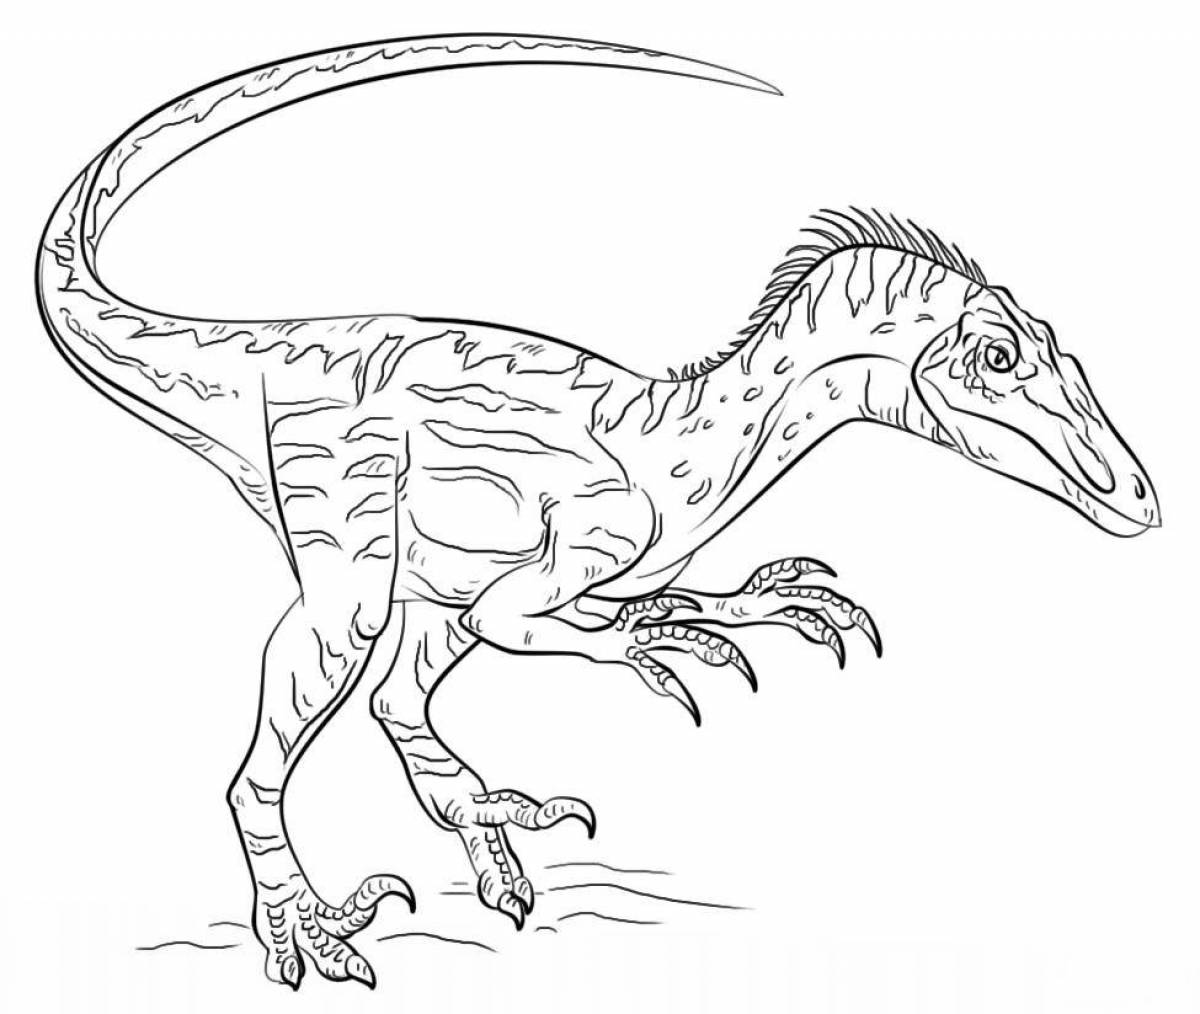 Indoraptor awesome coloring page